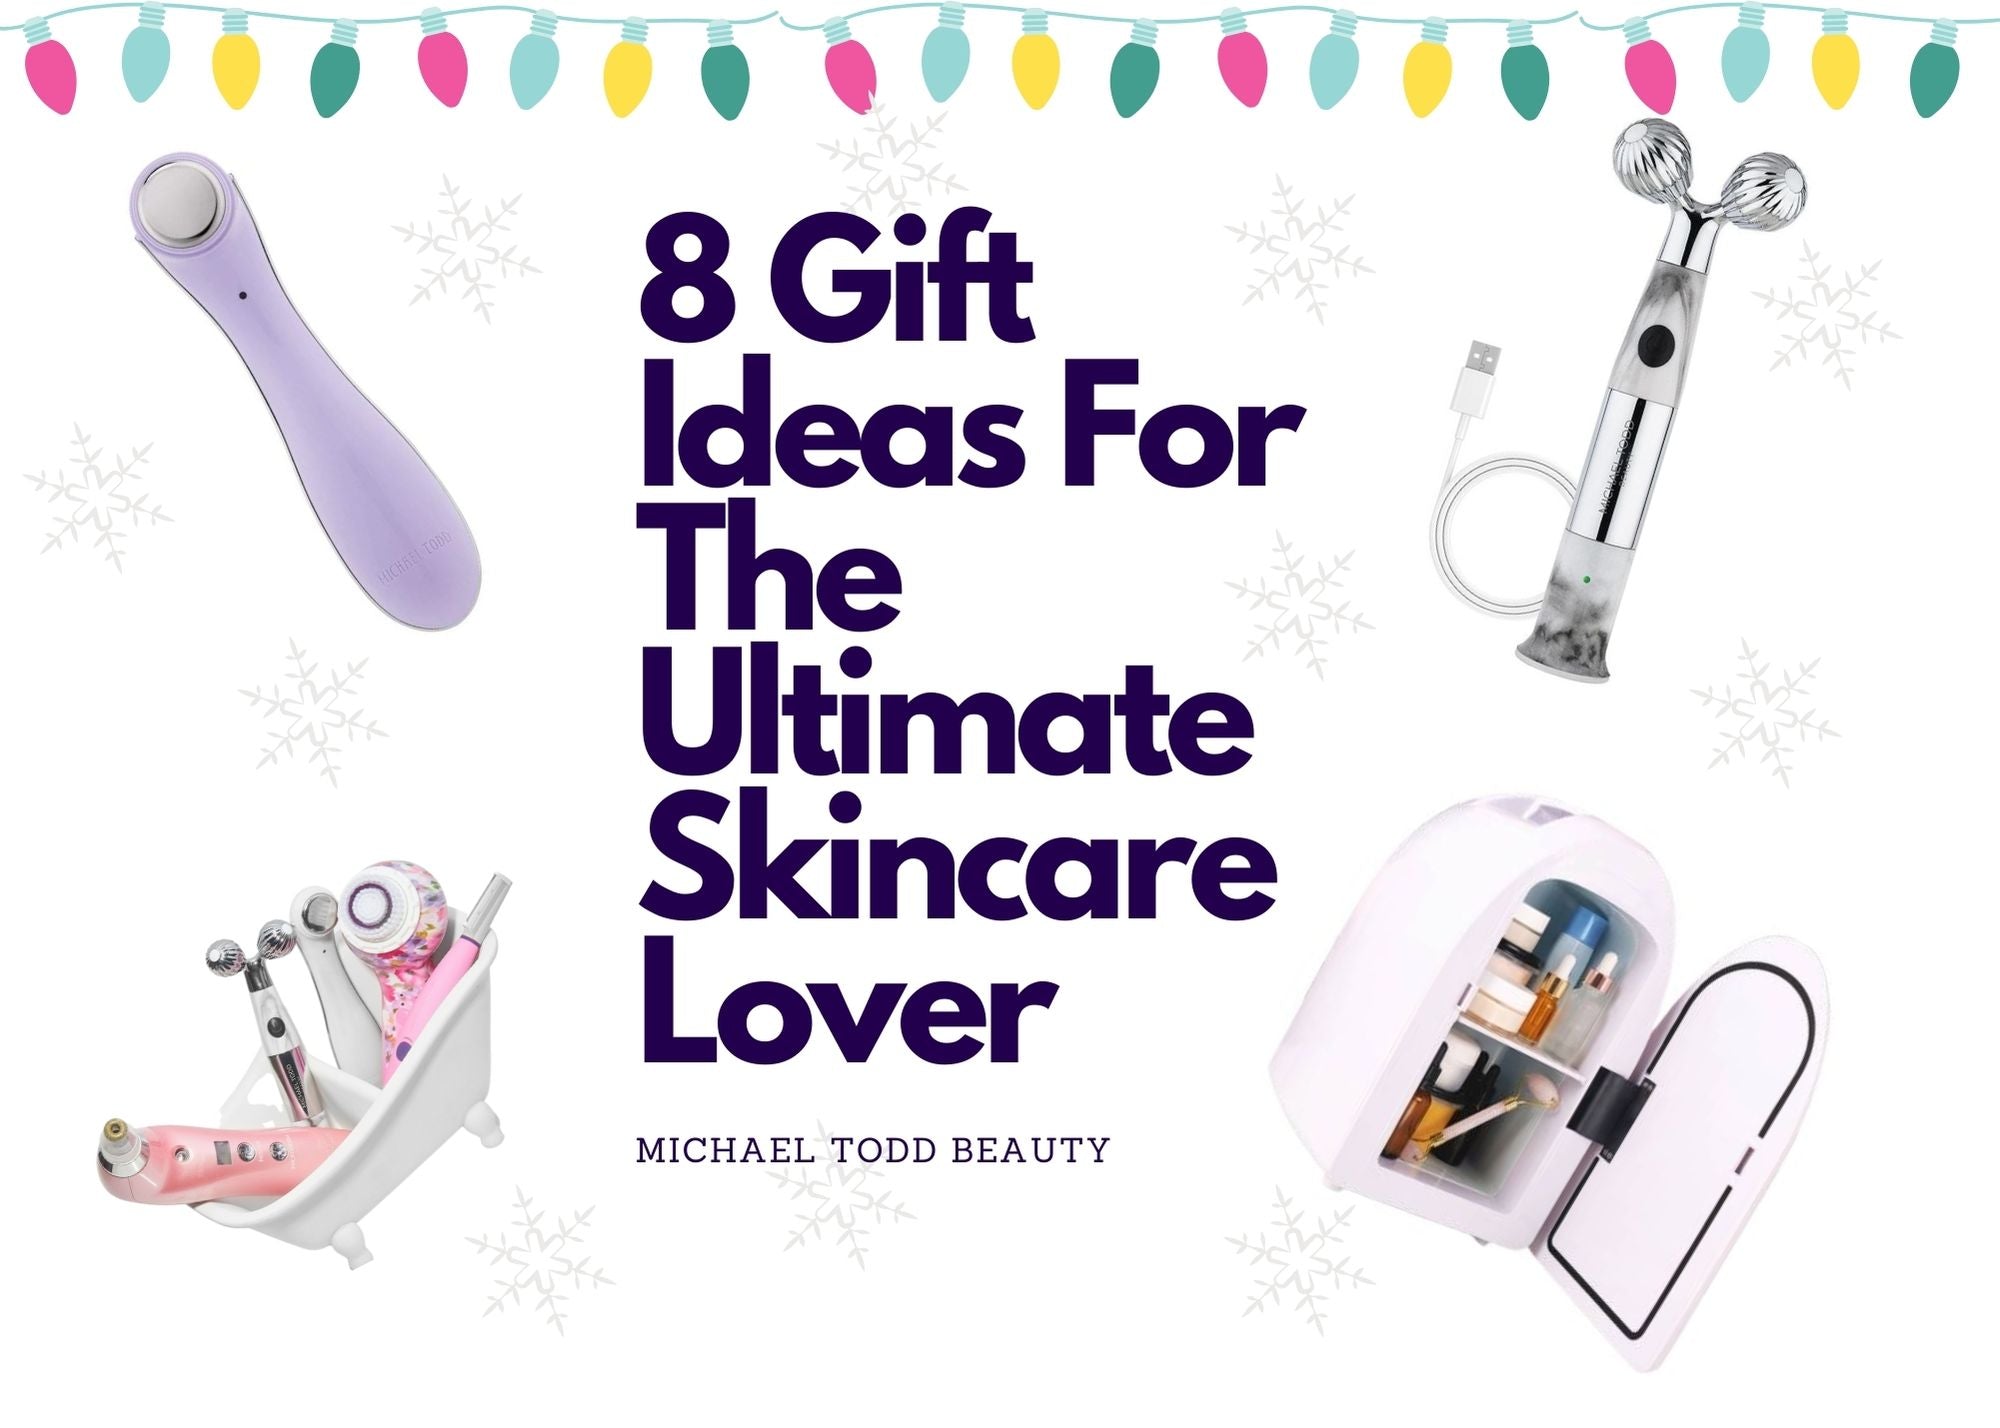 8 Gift Ideas for The Ultimate Skincare Lover